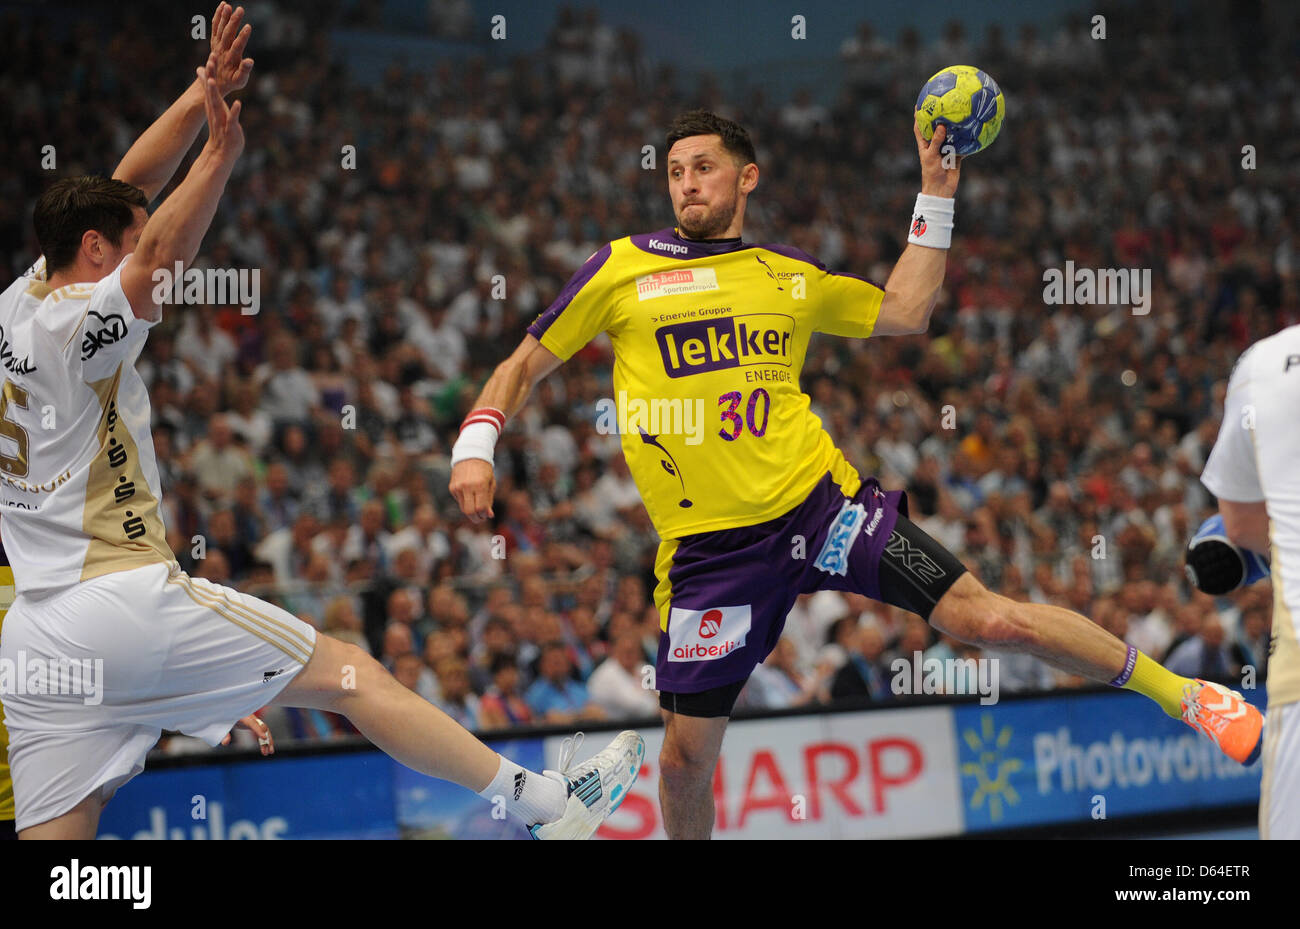 Berlin's Alexander Petersson tries to score a goal Kiel's Kim Andersson  during the EHF Champions League Final Four semi-final match between Fuechse  Berlin and THW Kiel at Lanxess Arena in Cologne, Germany,